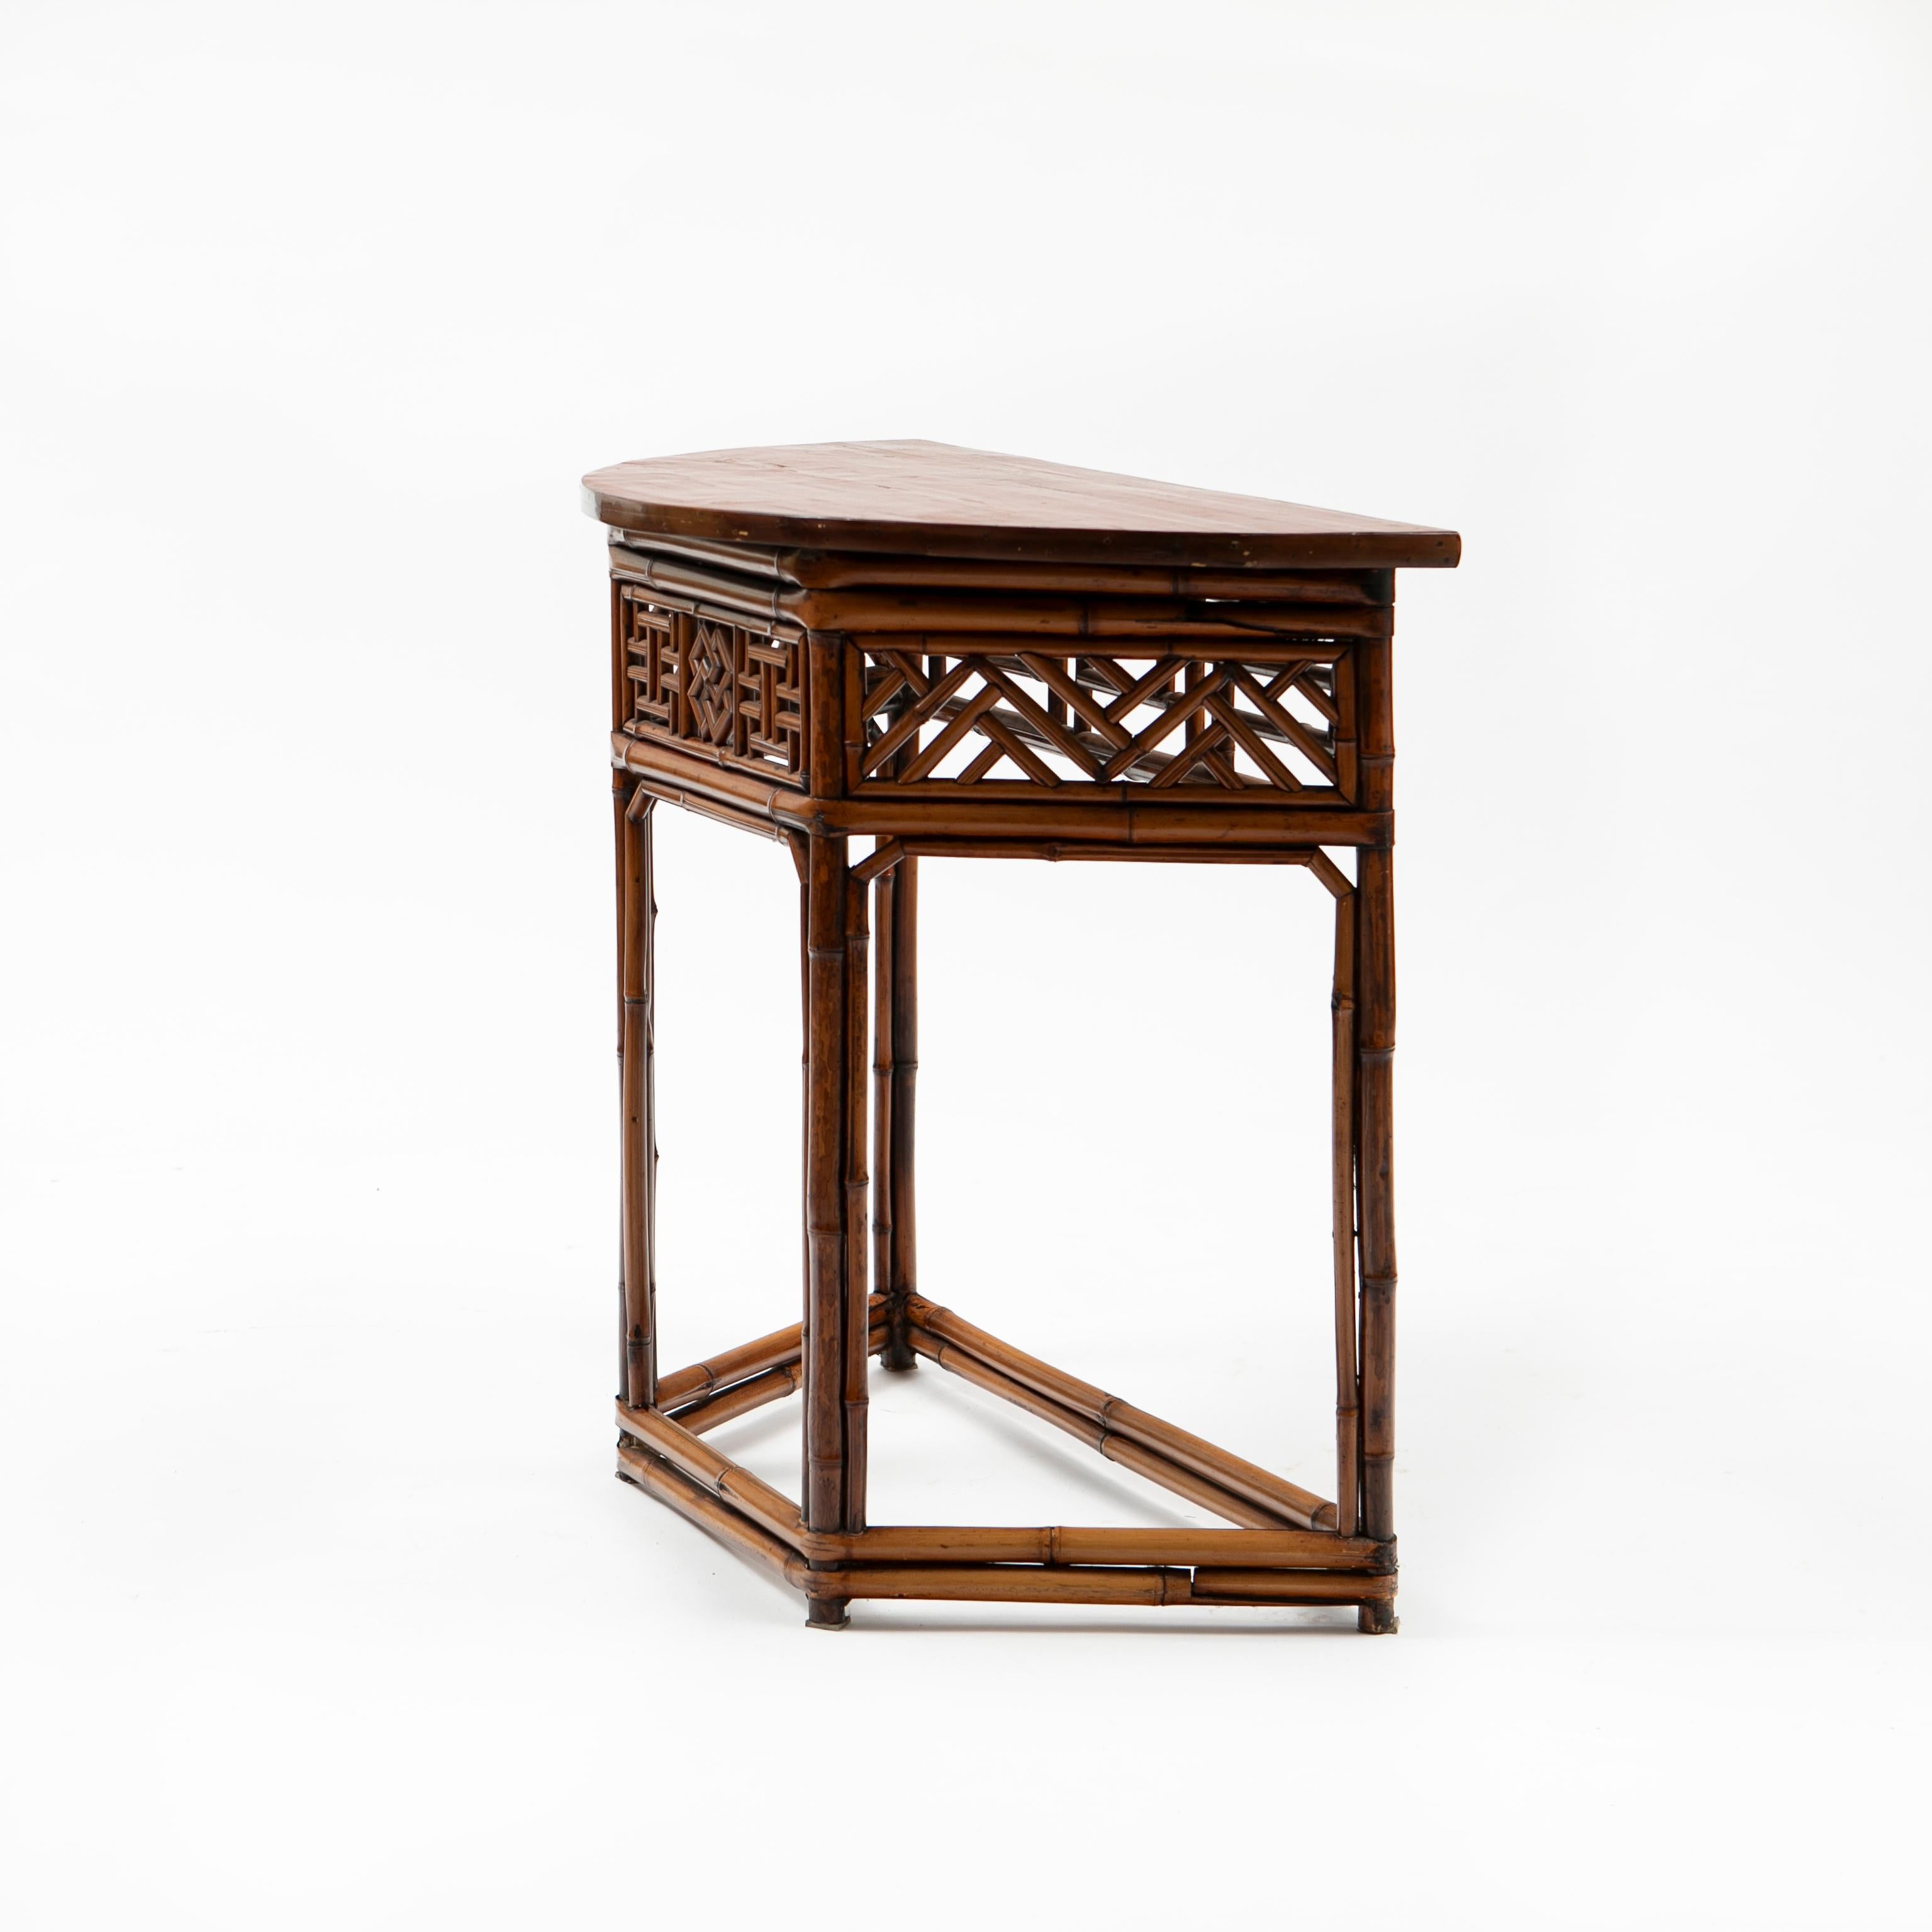 Elegant Chinese bamboo demilune table with a 4 sided open geometric fretwork design and a demilune shaped red lacquer wooden top.
Original condition with a natural age-related patina, enhanced with a clear lacquer finish. Would make a great entry